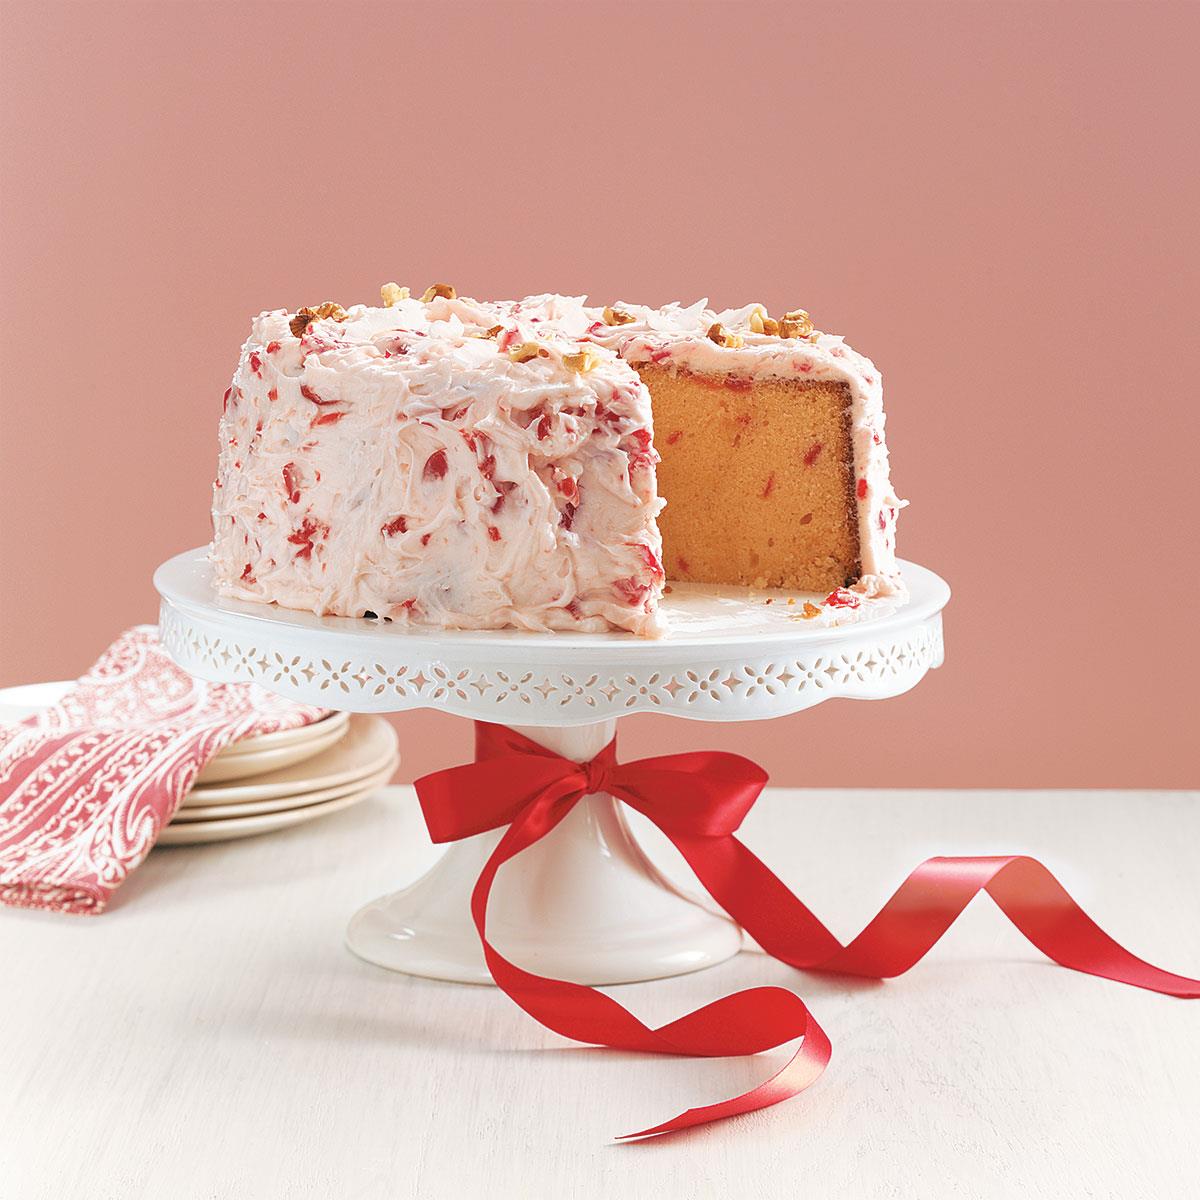 Strawberry Pound Cake w/ Cream Cheese Drizzle | Just A Pinch